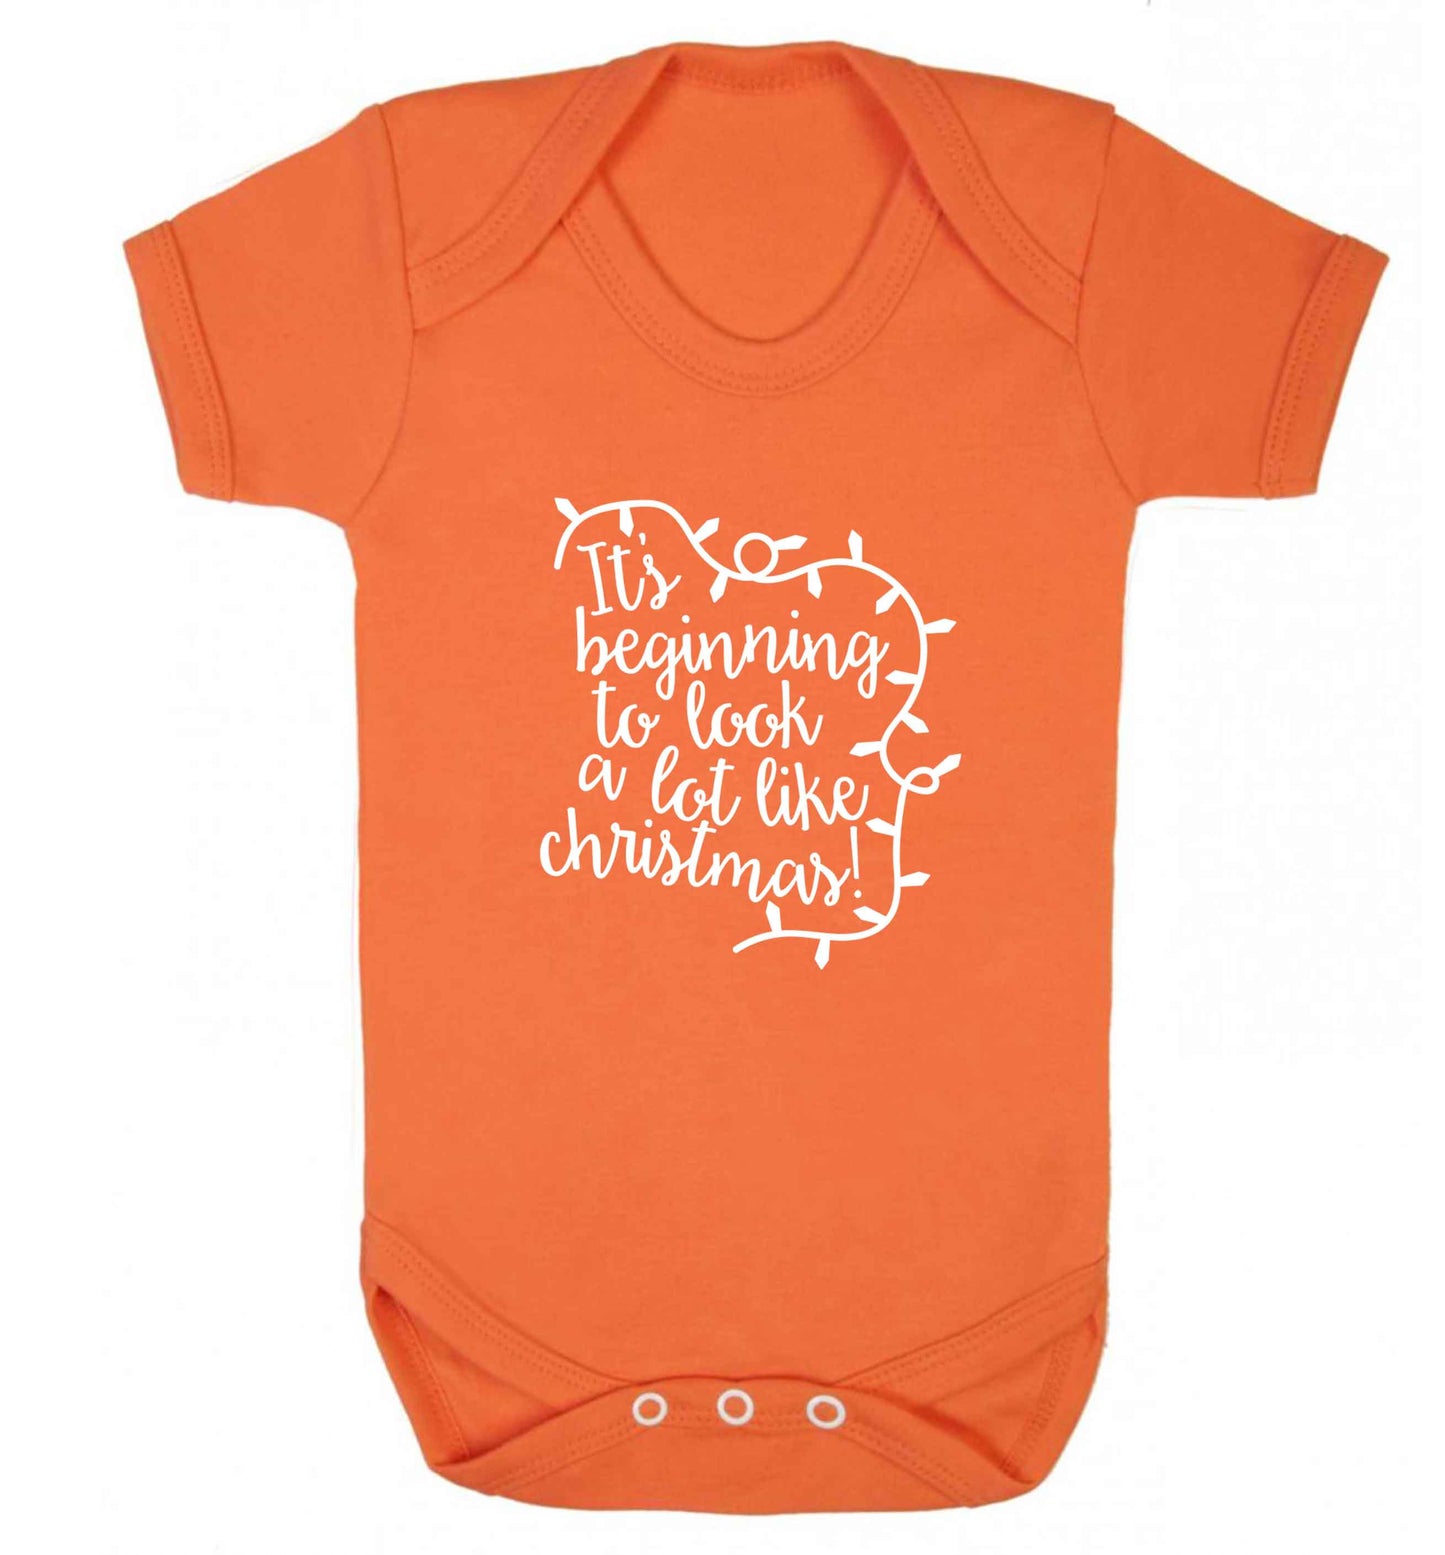 It's beginning to look a lot like Christmas baby vest orange 18-24 months